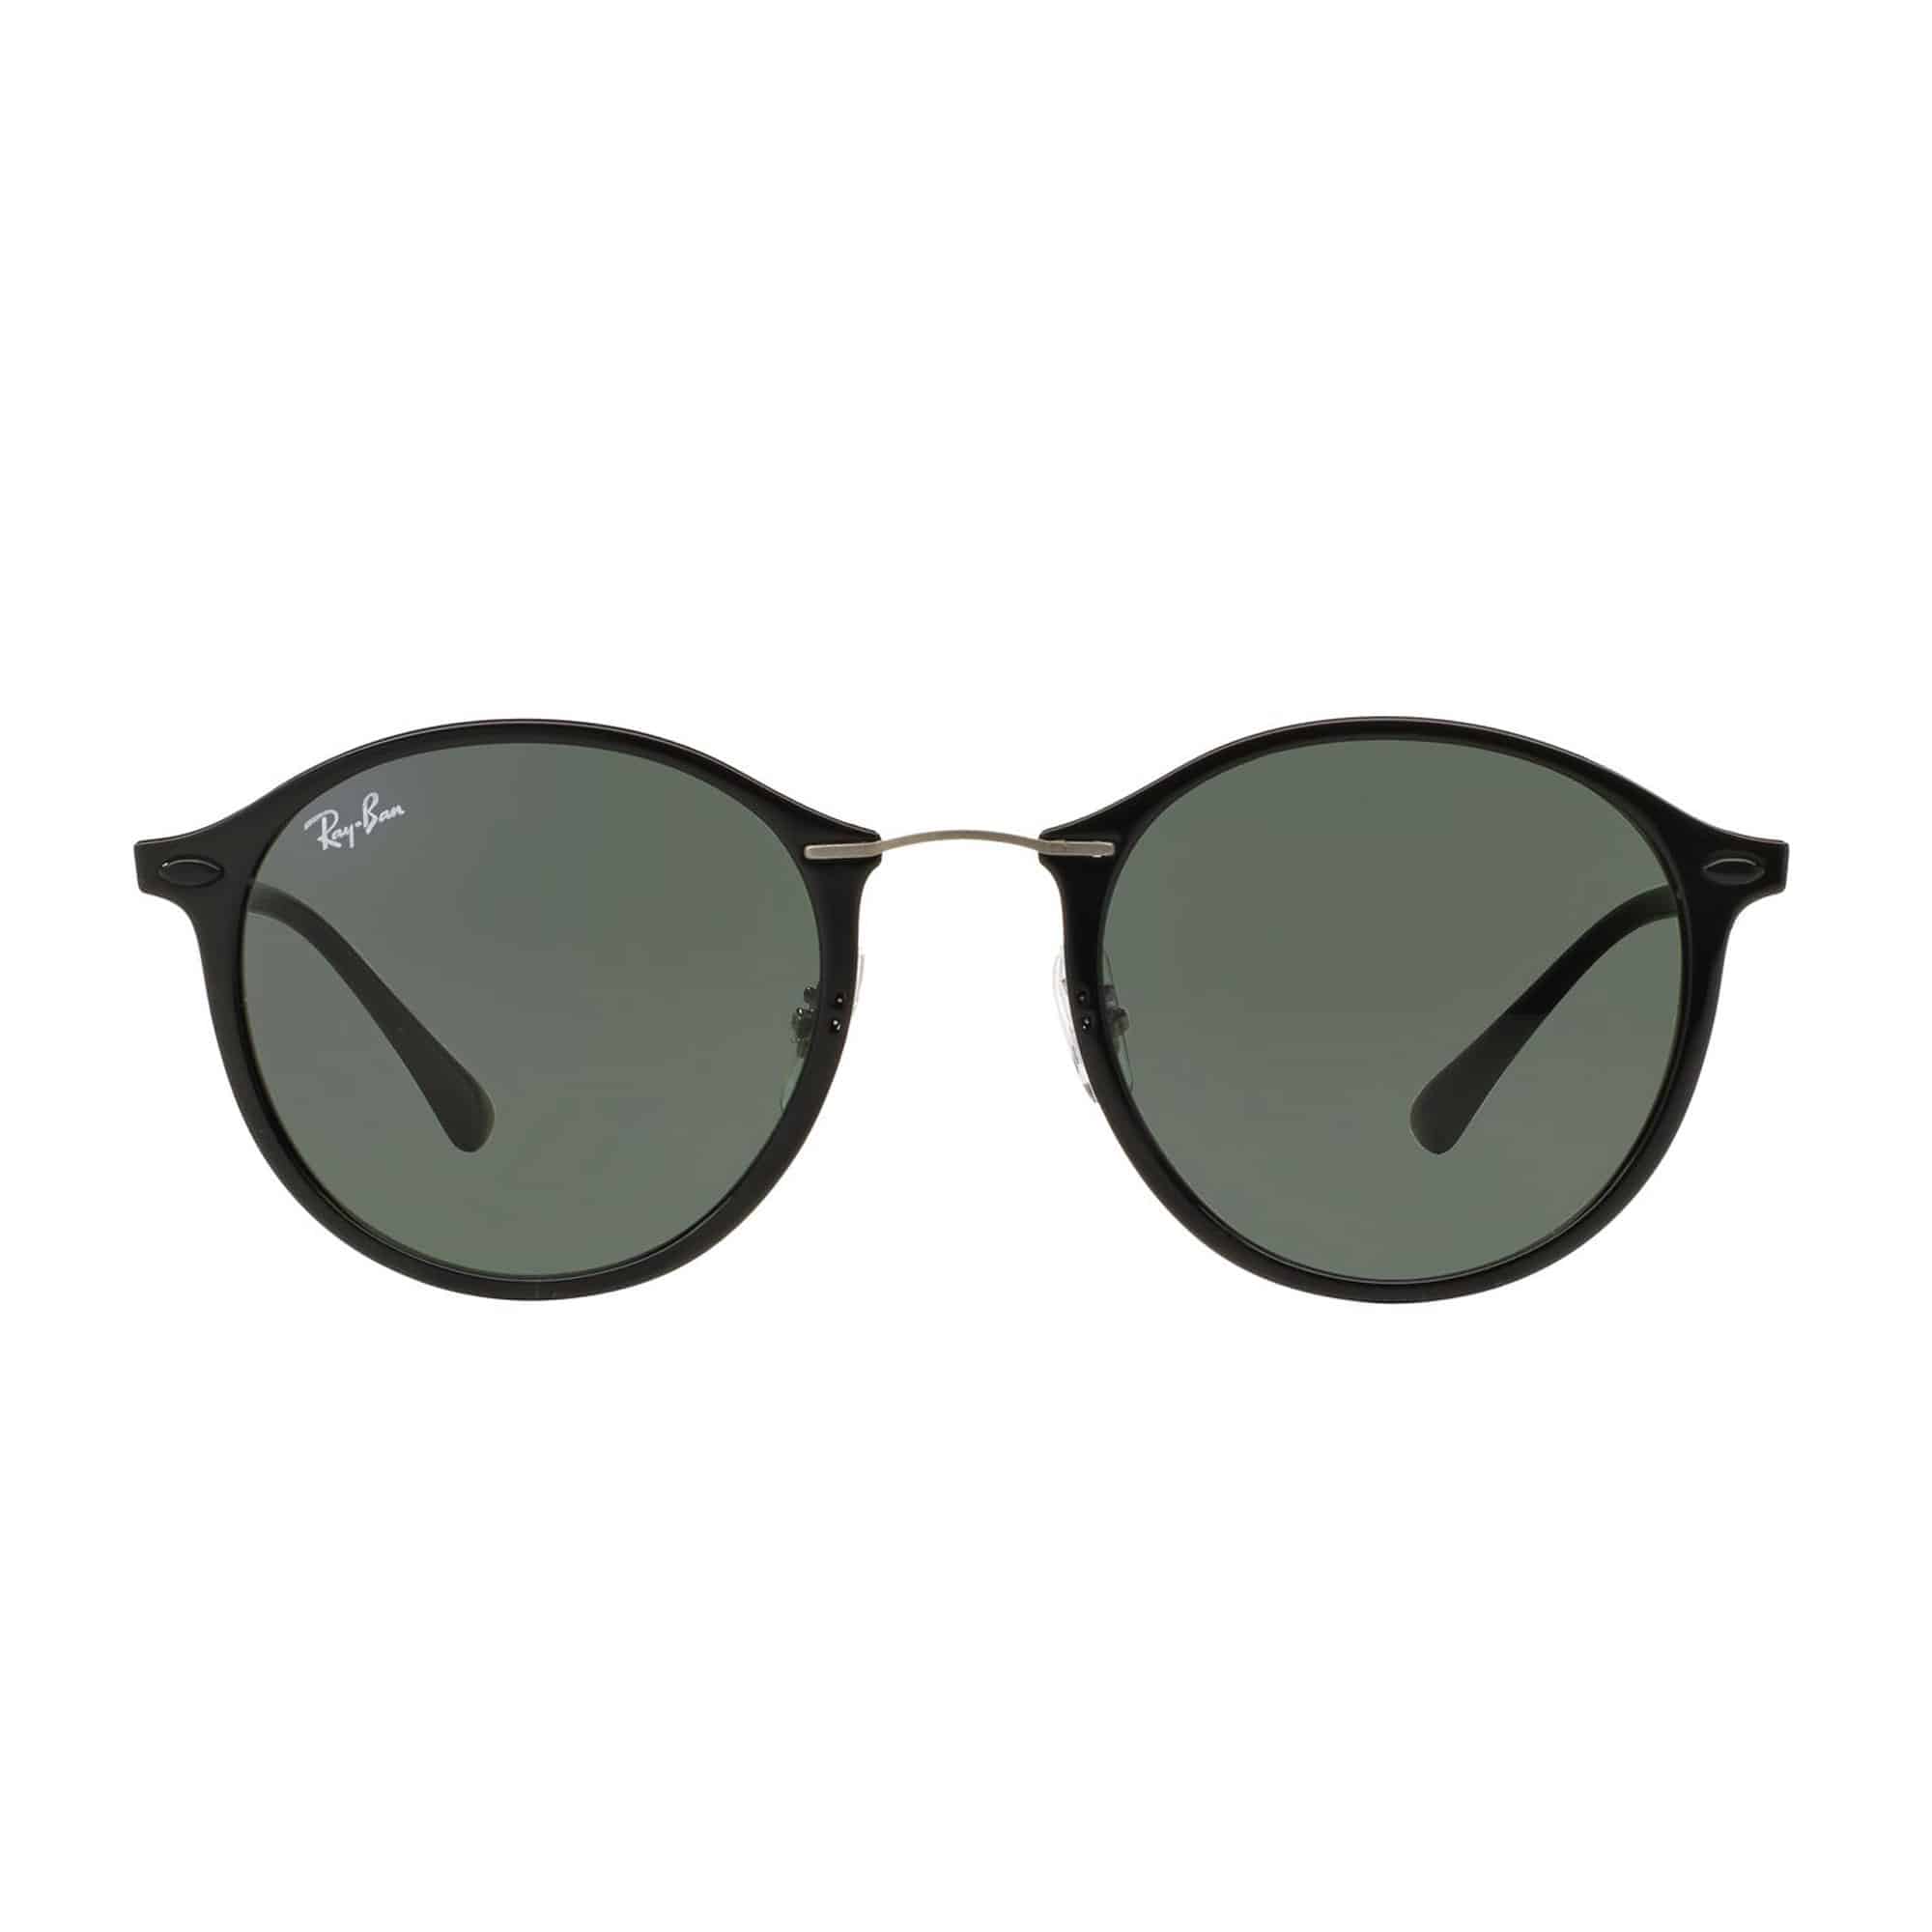 Classic Composition Shilling RB4242 | Sunglass & Optical - San Diego's Lowest Prices